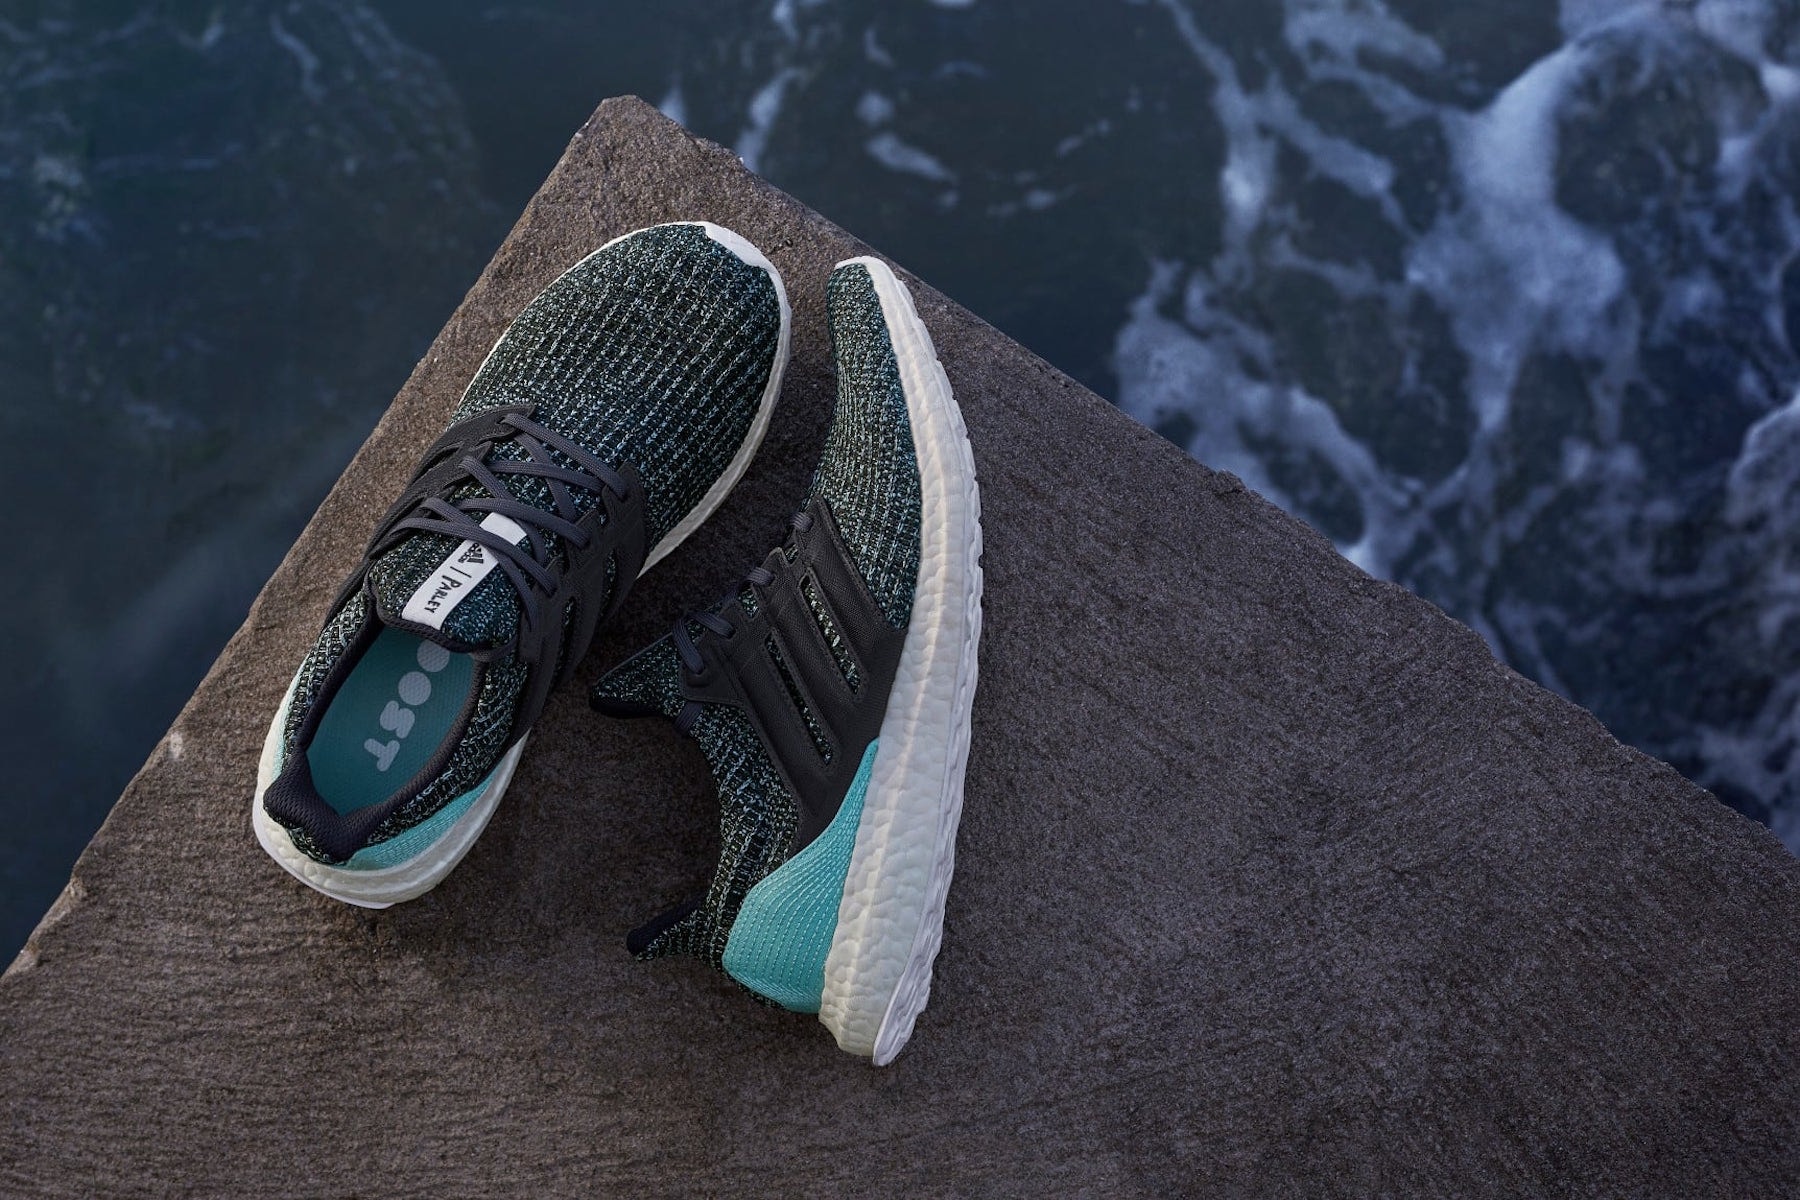 Parley for the Oceans x adidas 全新聯名 UltraBOOST 系列正式發布